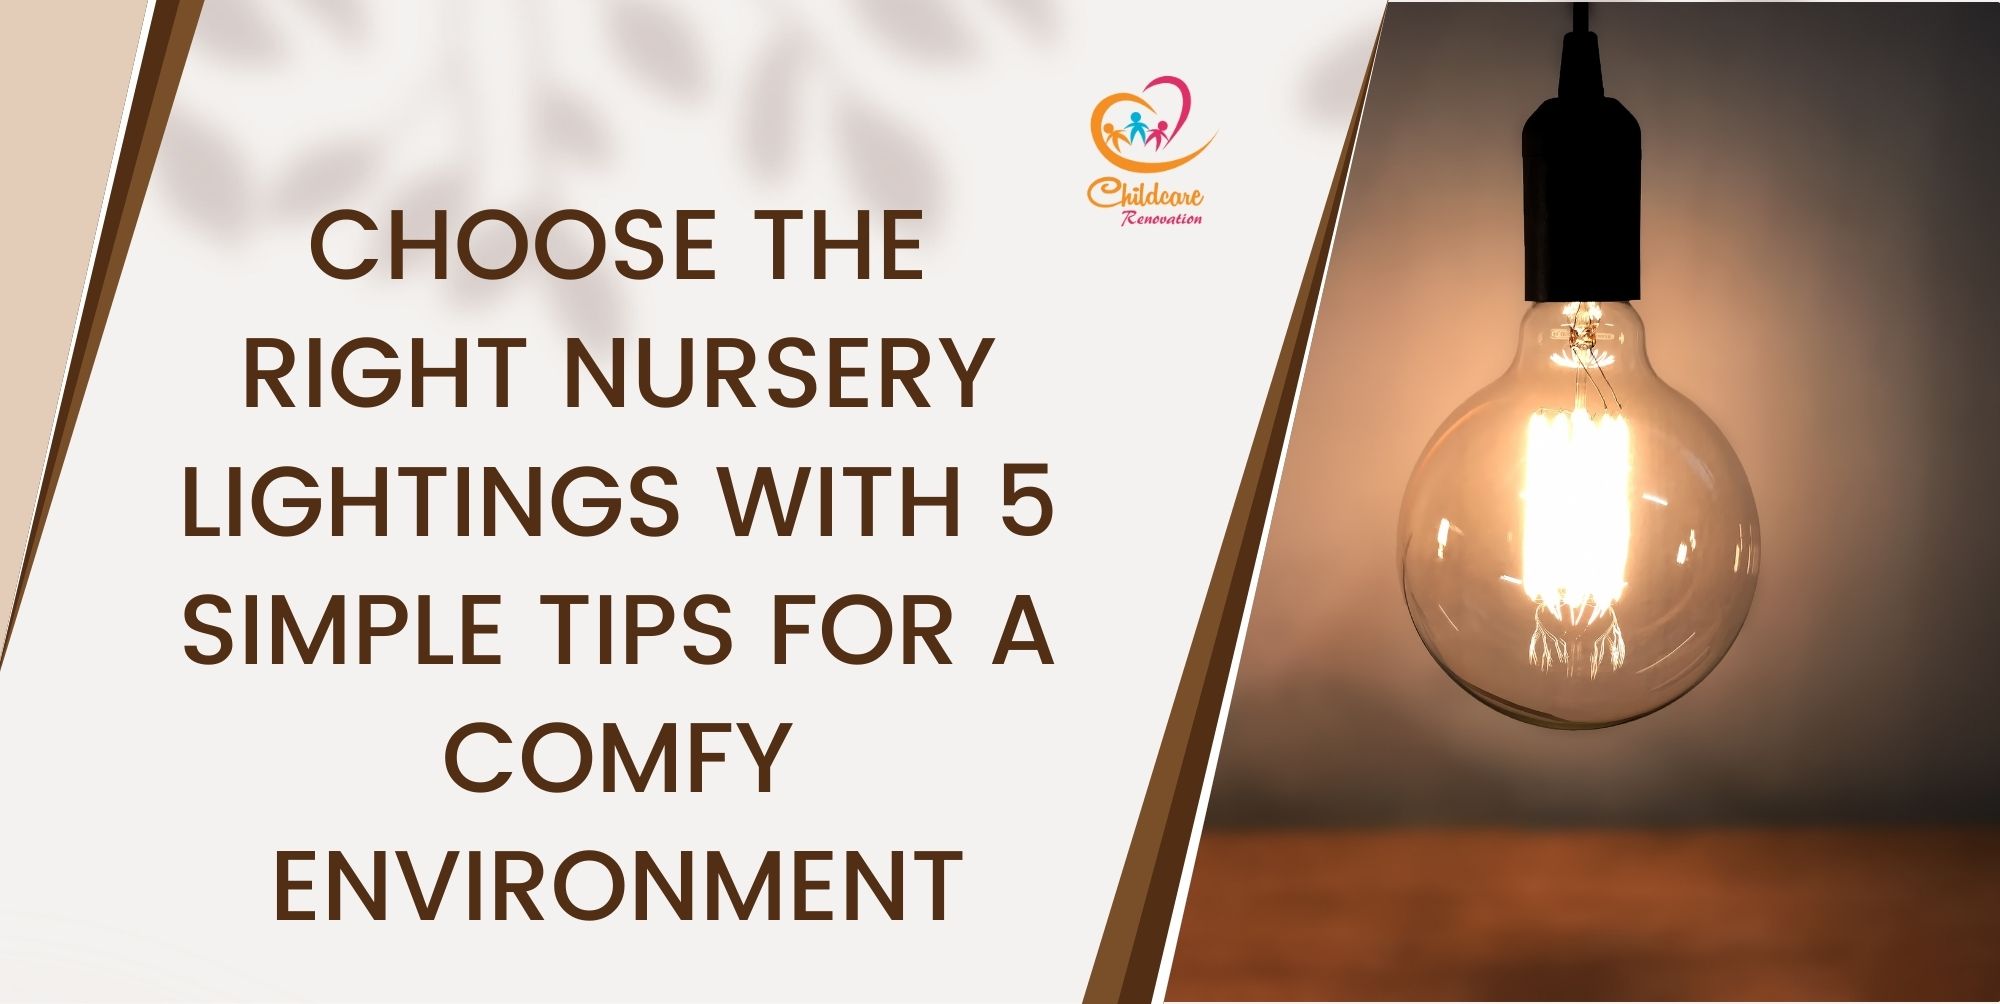 Choose The Right Nursery Lightings With 5 Simple Tips For A Comfy Environment